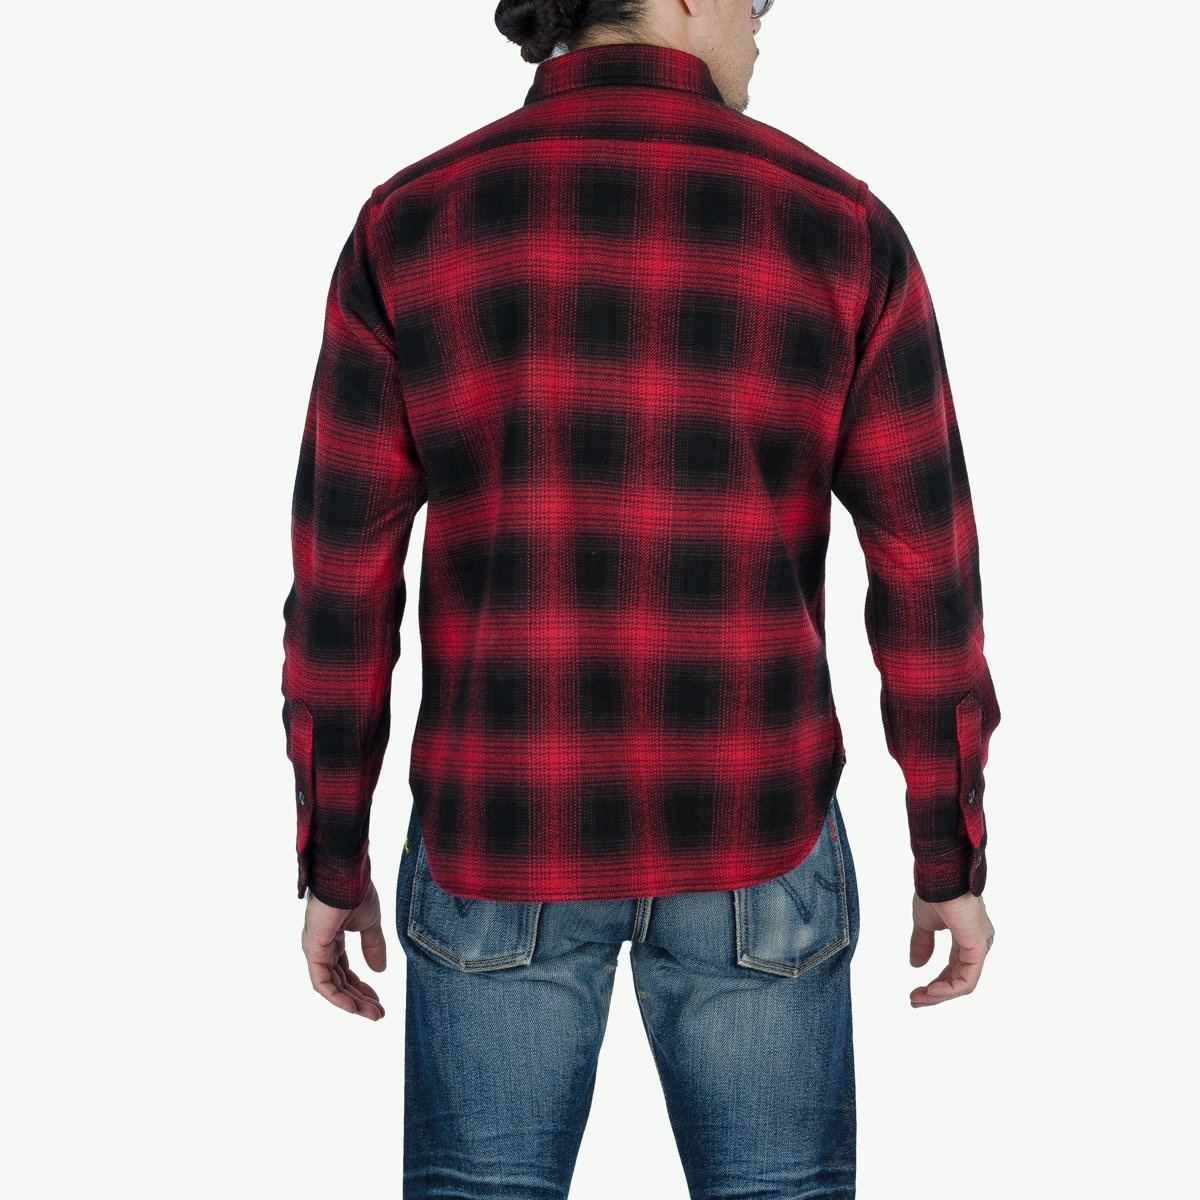 IHSH-265-RED Ultra Heavy Flannel Ombré Check Work Shirt - Red/Black - 3